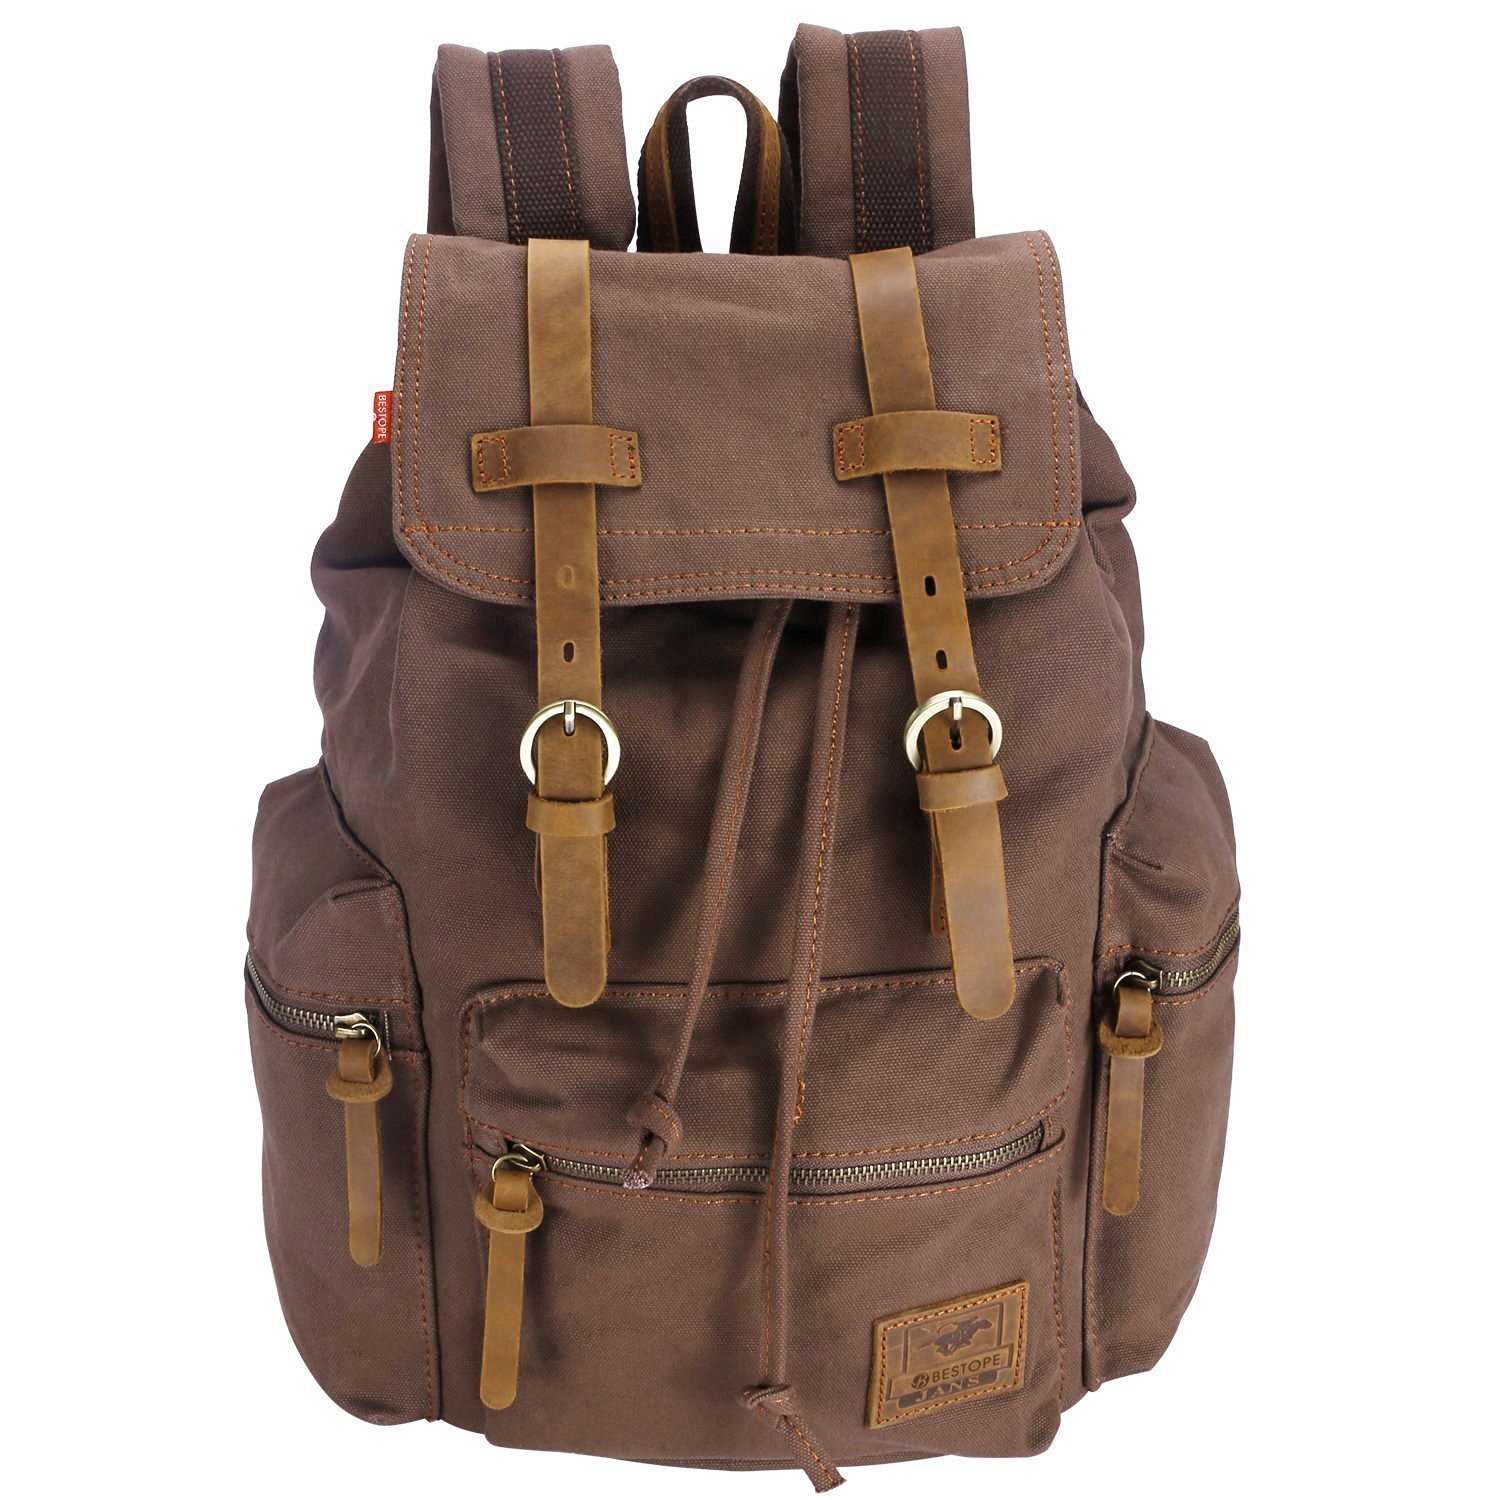 Canvas Leather Hiking Travel Military Backpack Save up to 56%